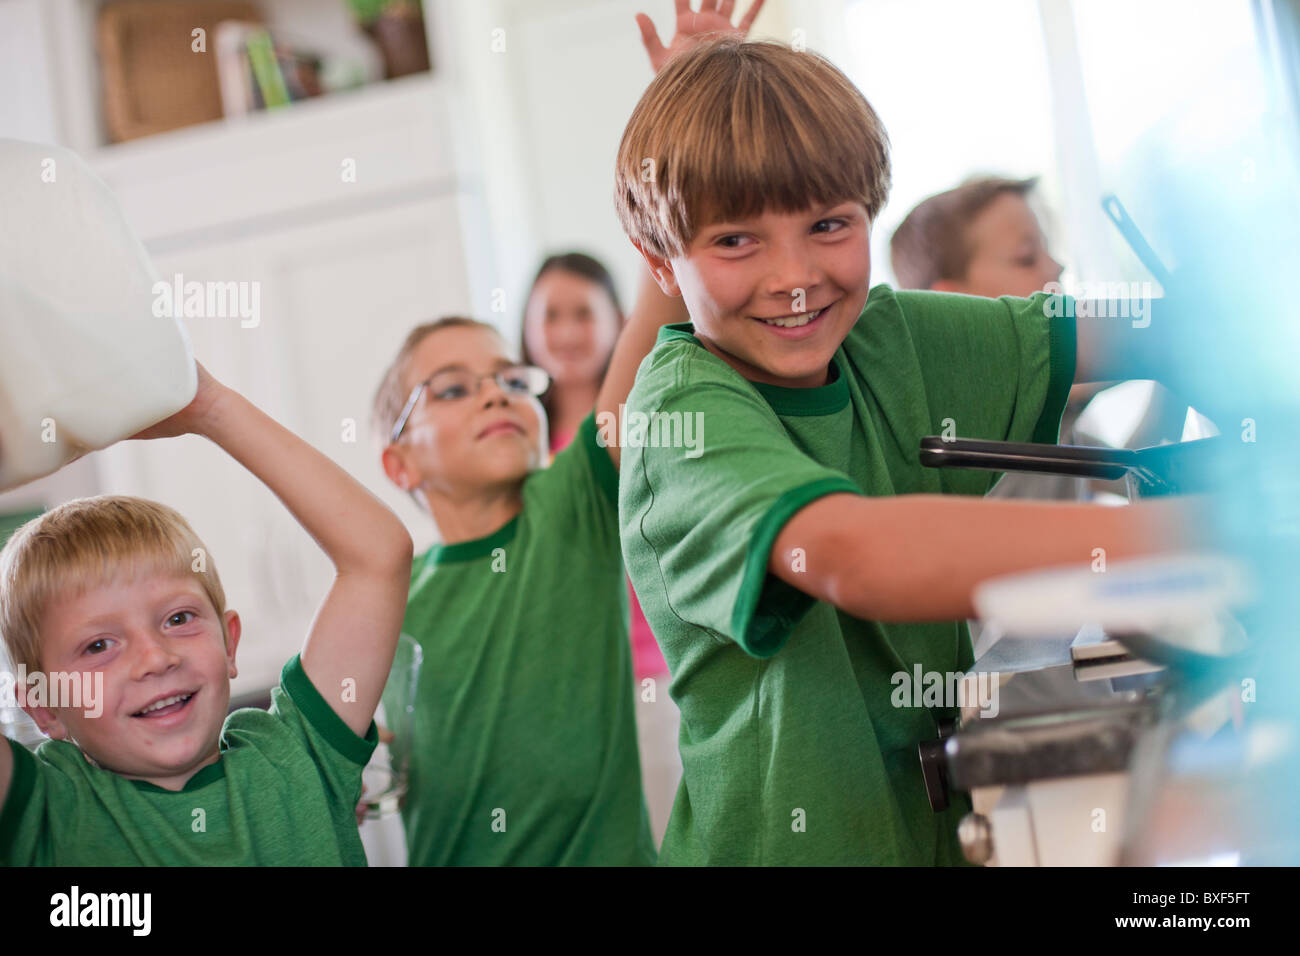 Group of children in kitchen Stock Photo